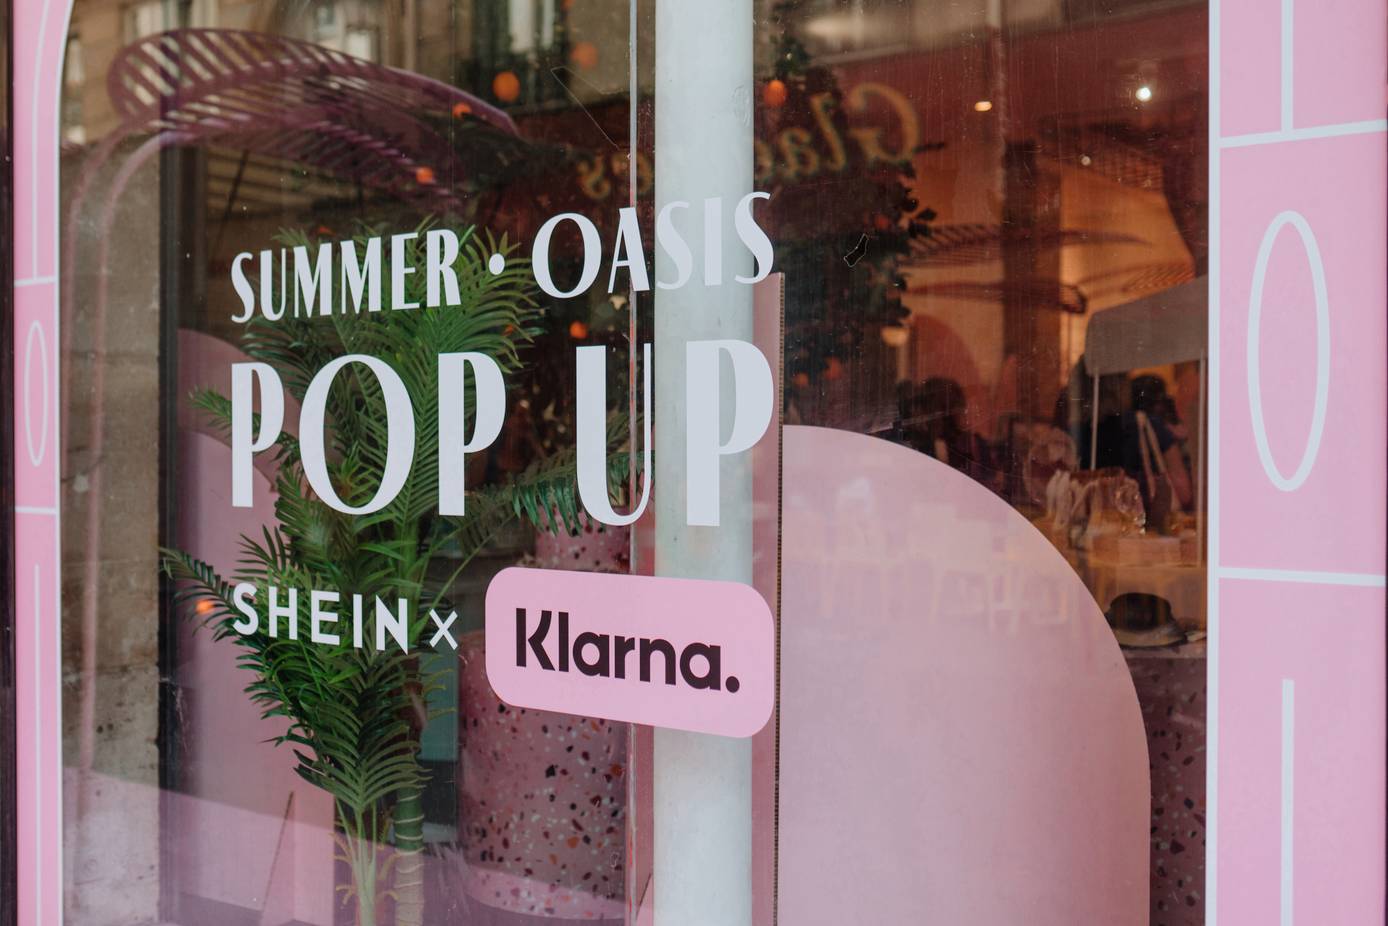 Is This The Summer Of The Pop-up Store?